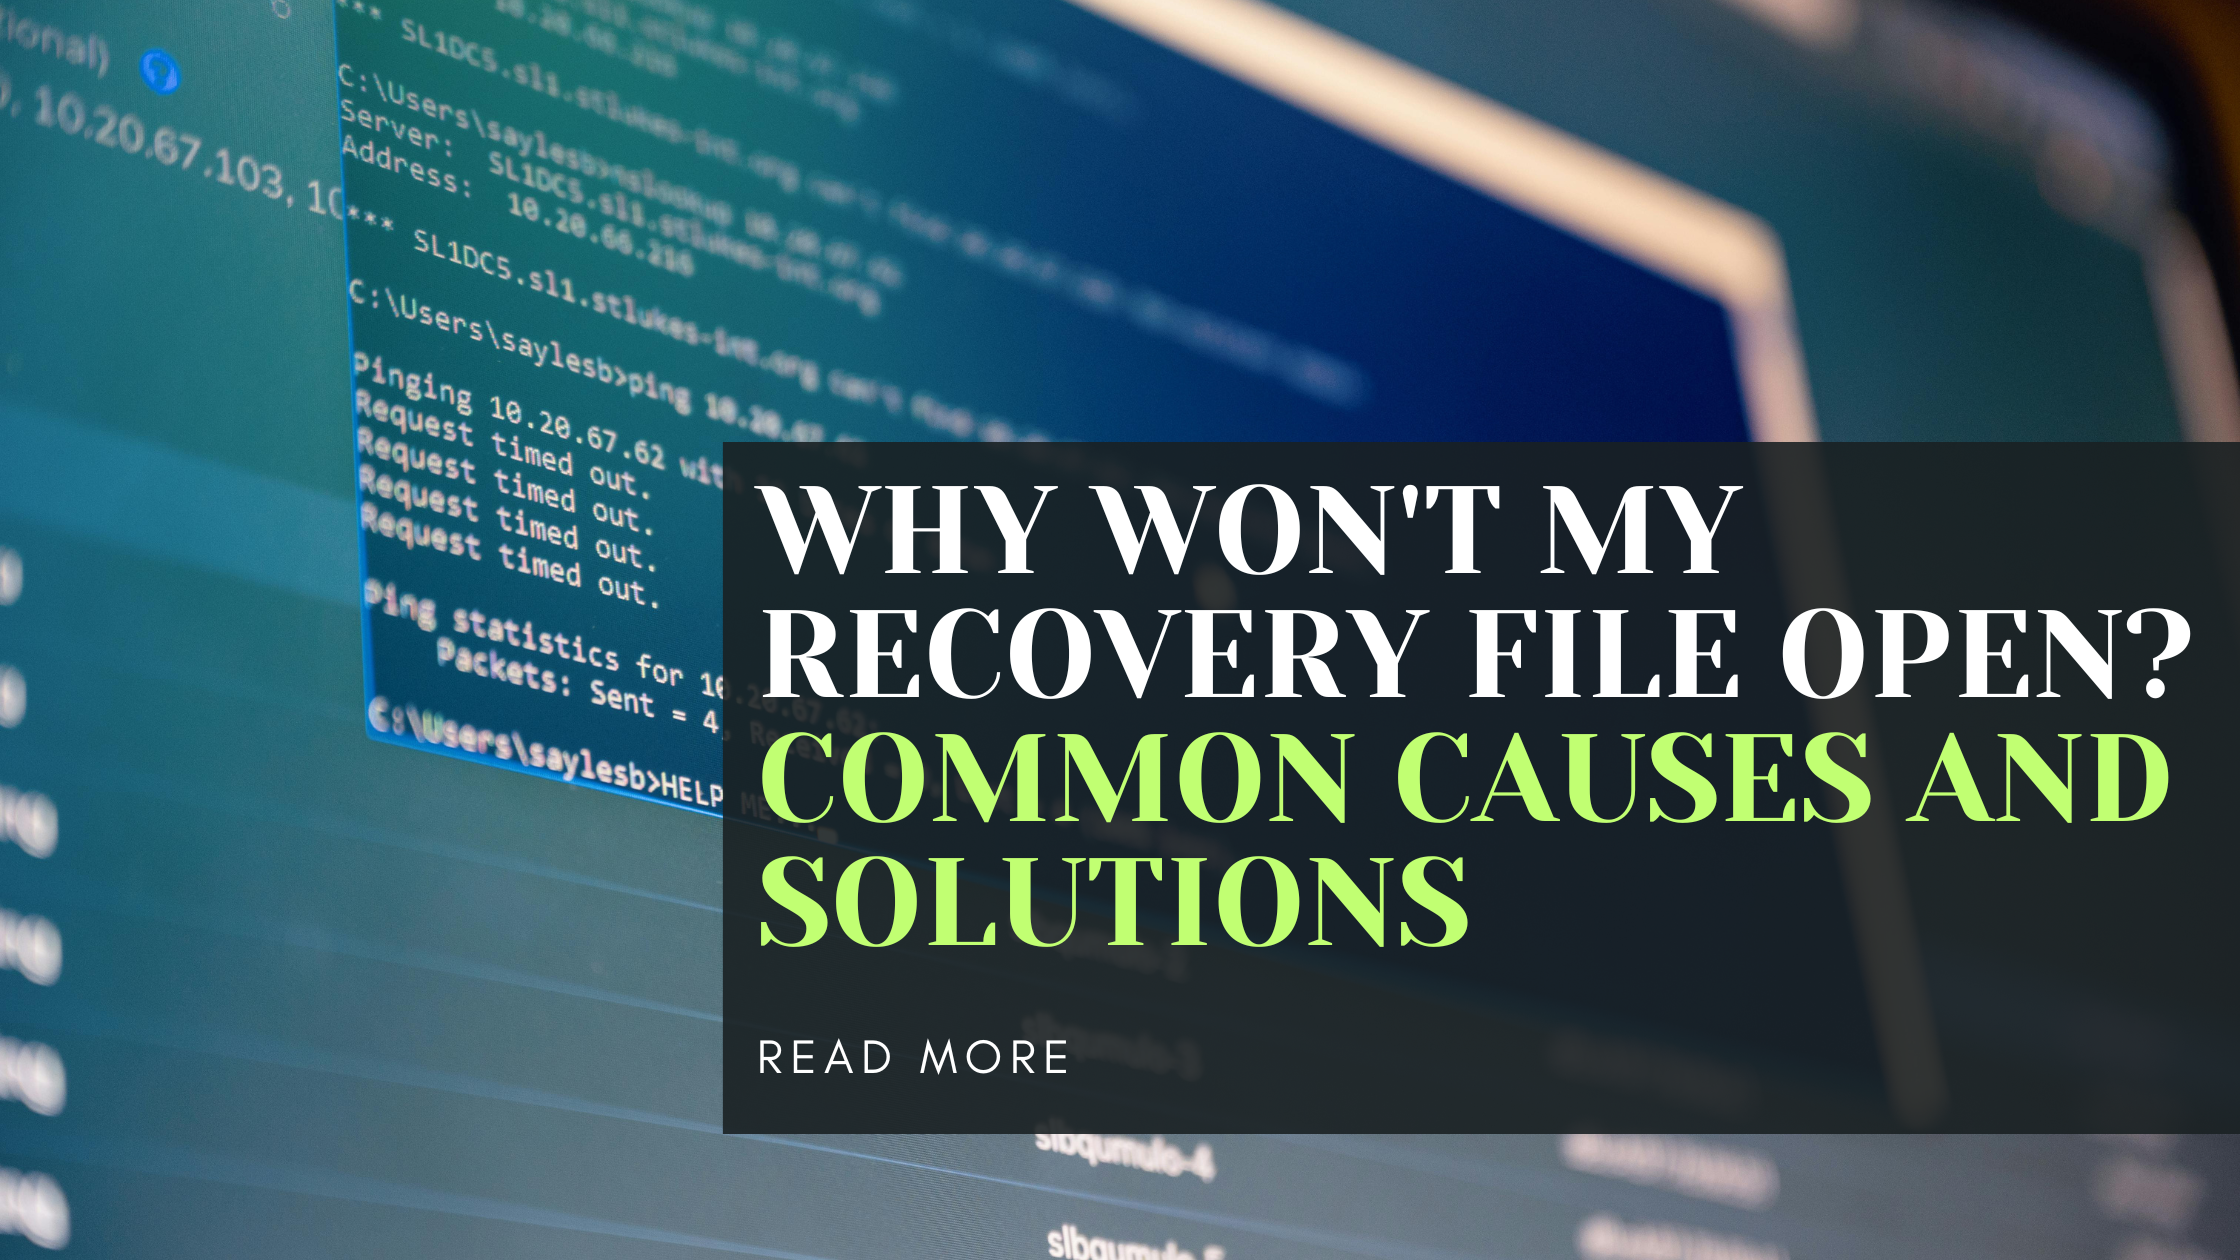 Why Won't My Recovery File Open? Common Causes and Solutions